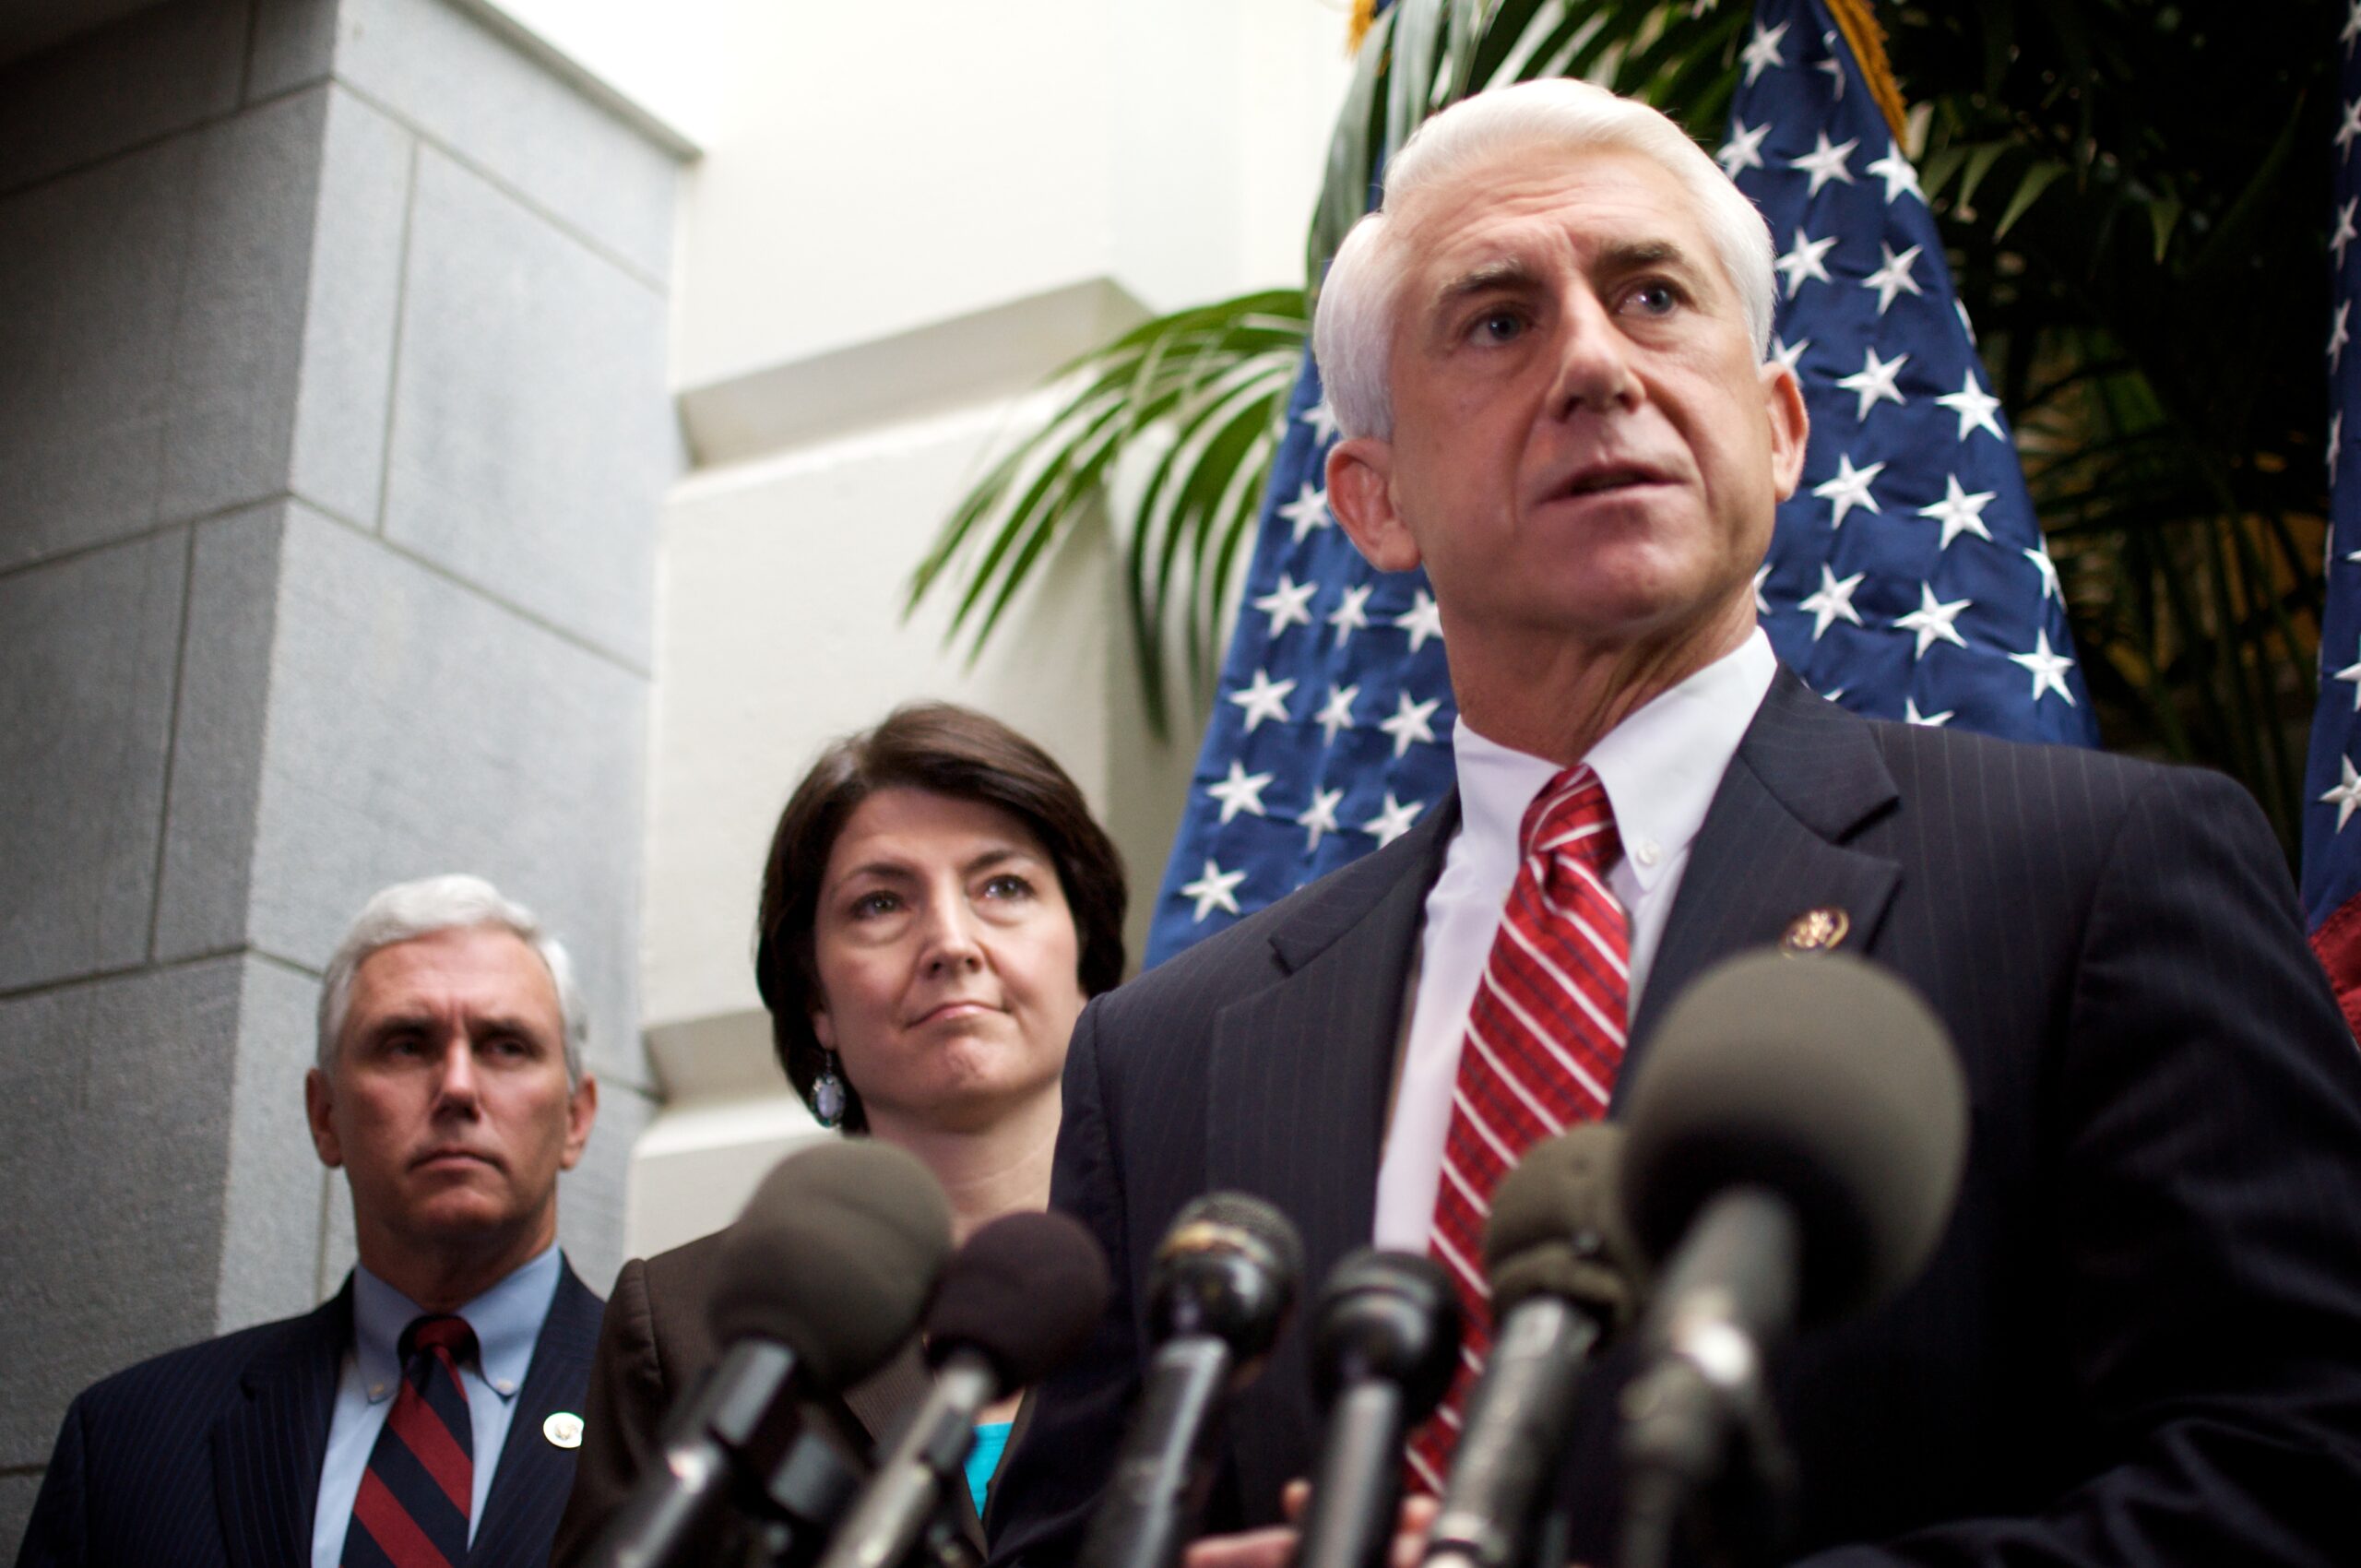 Rep. Mike Pence, Rep. Cathy McMorris Rodgers, Rep. Dave Reichert